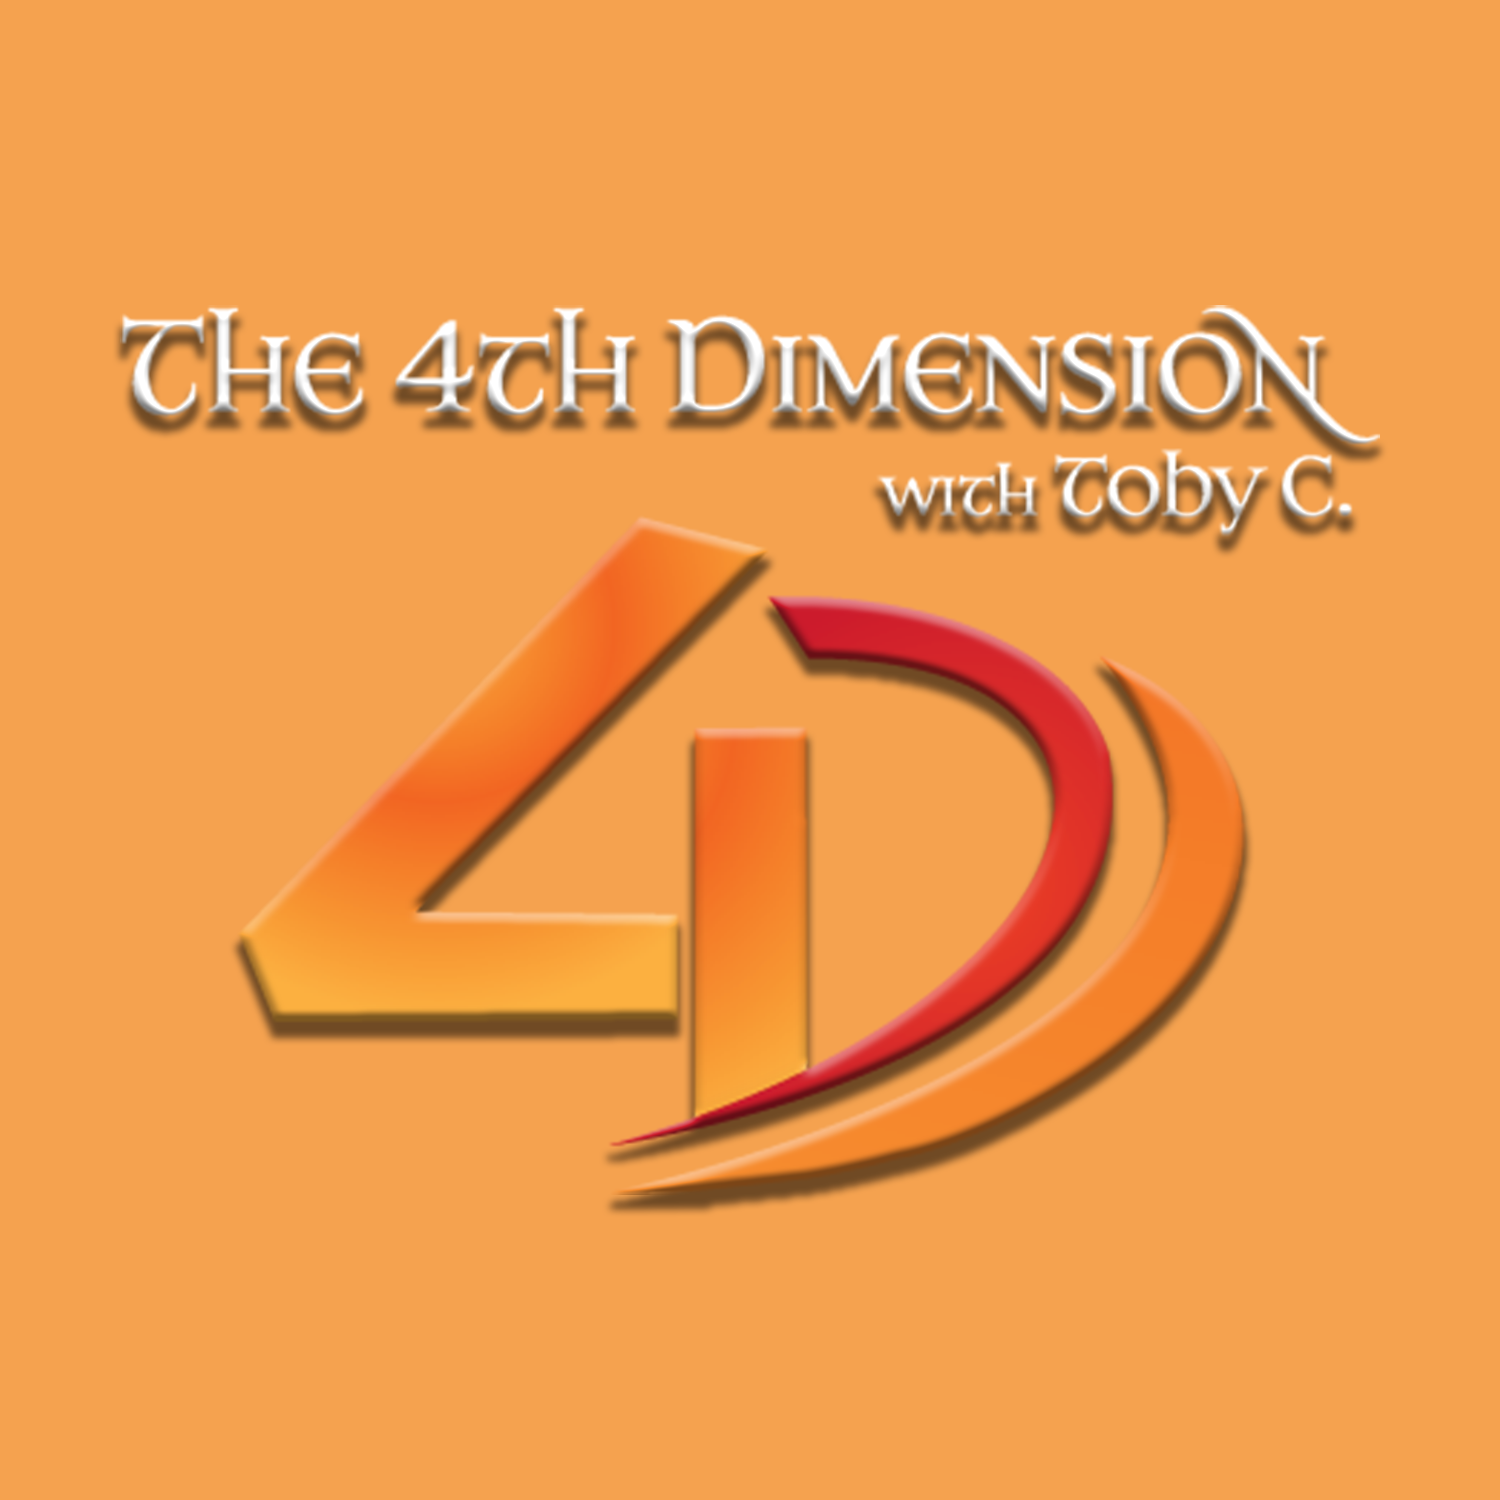 Artwork for podcast The 4th Dimension with Toby C